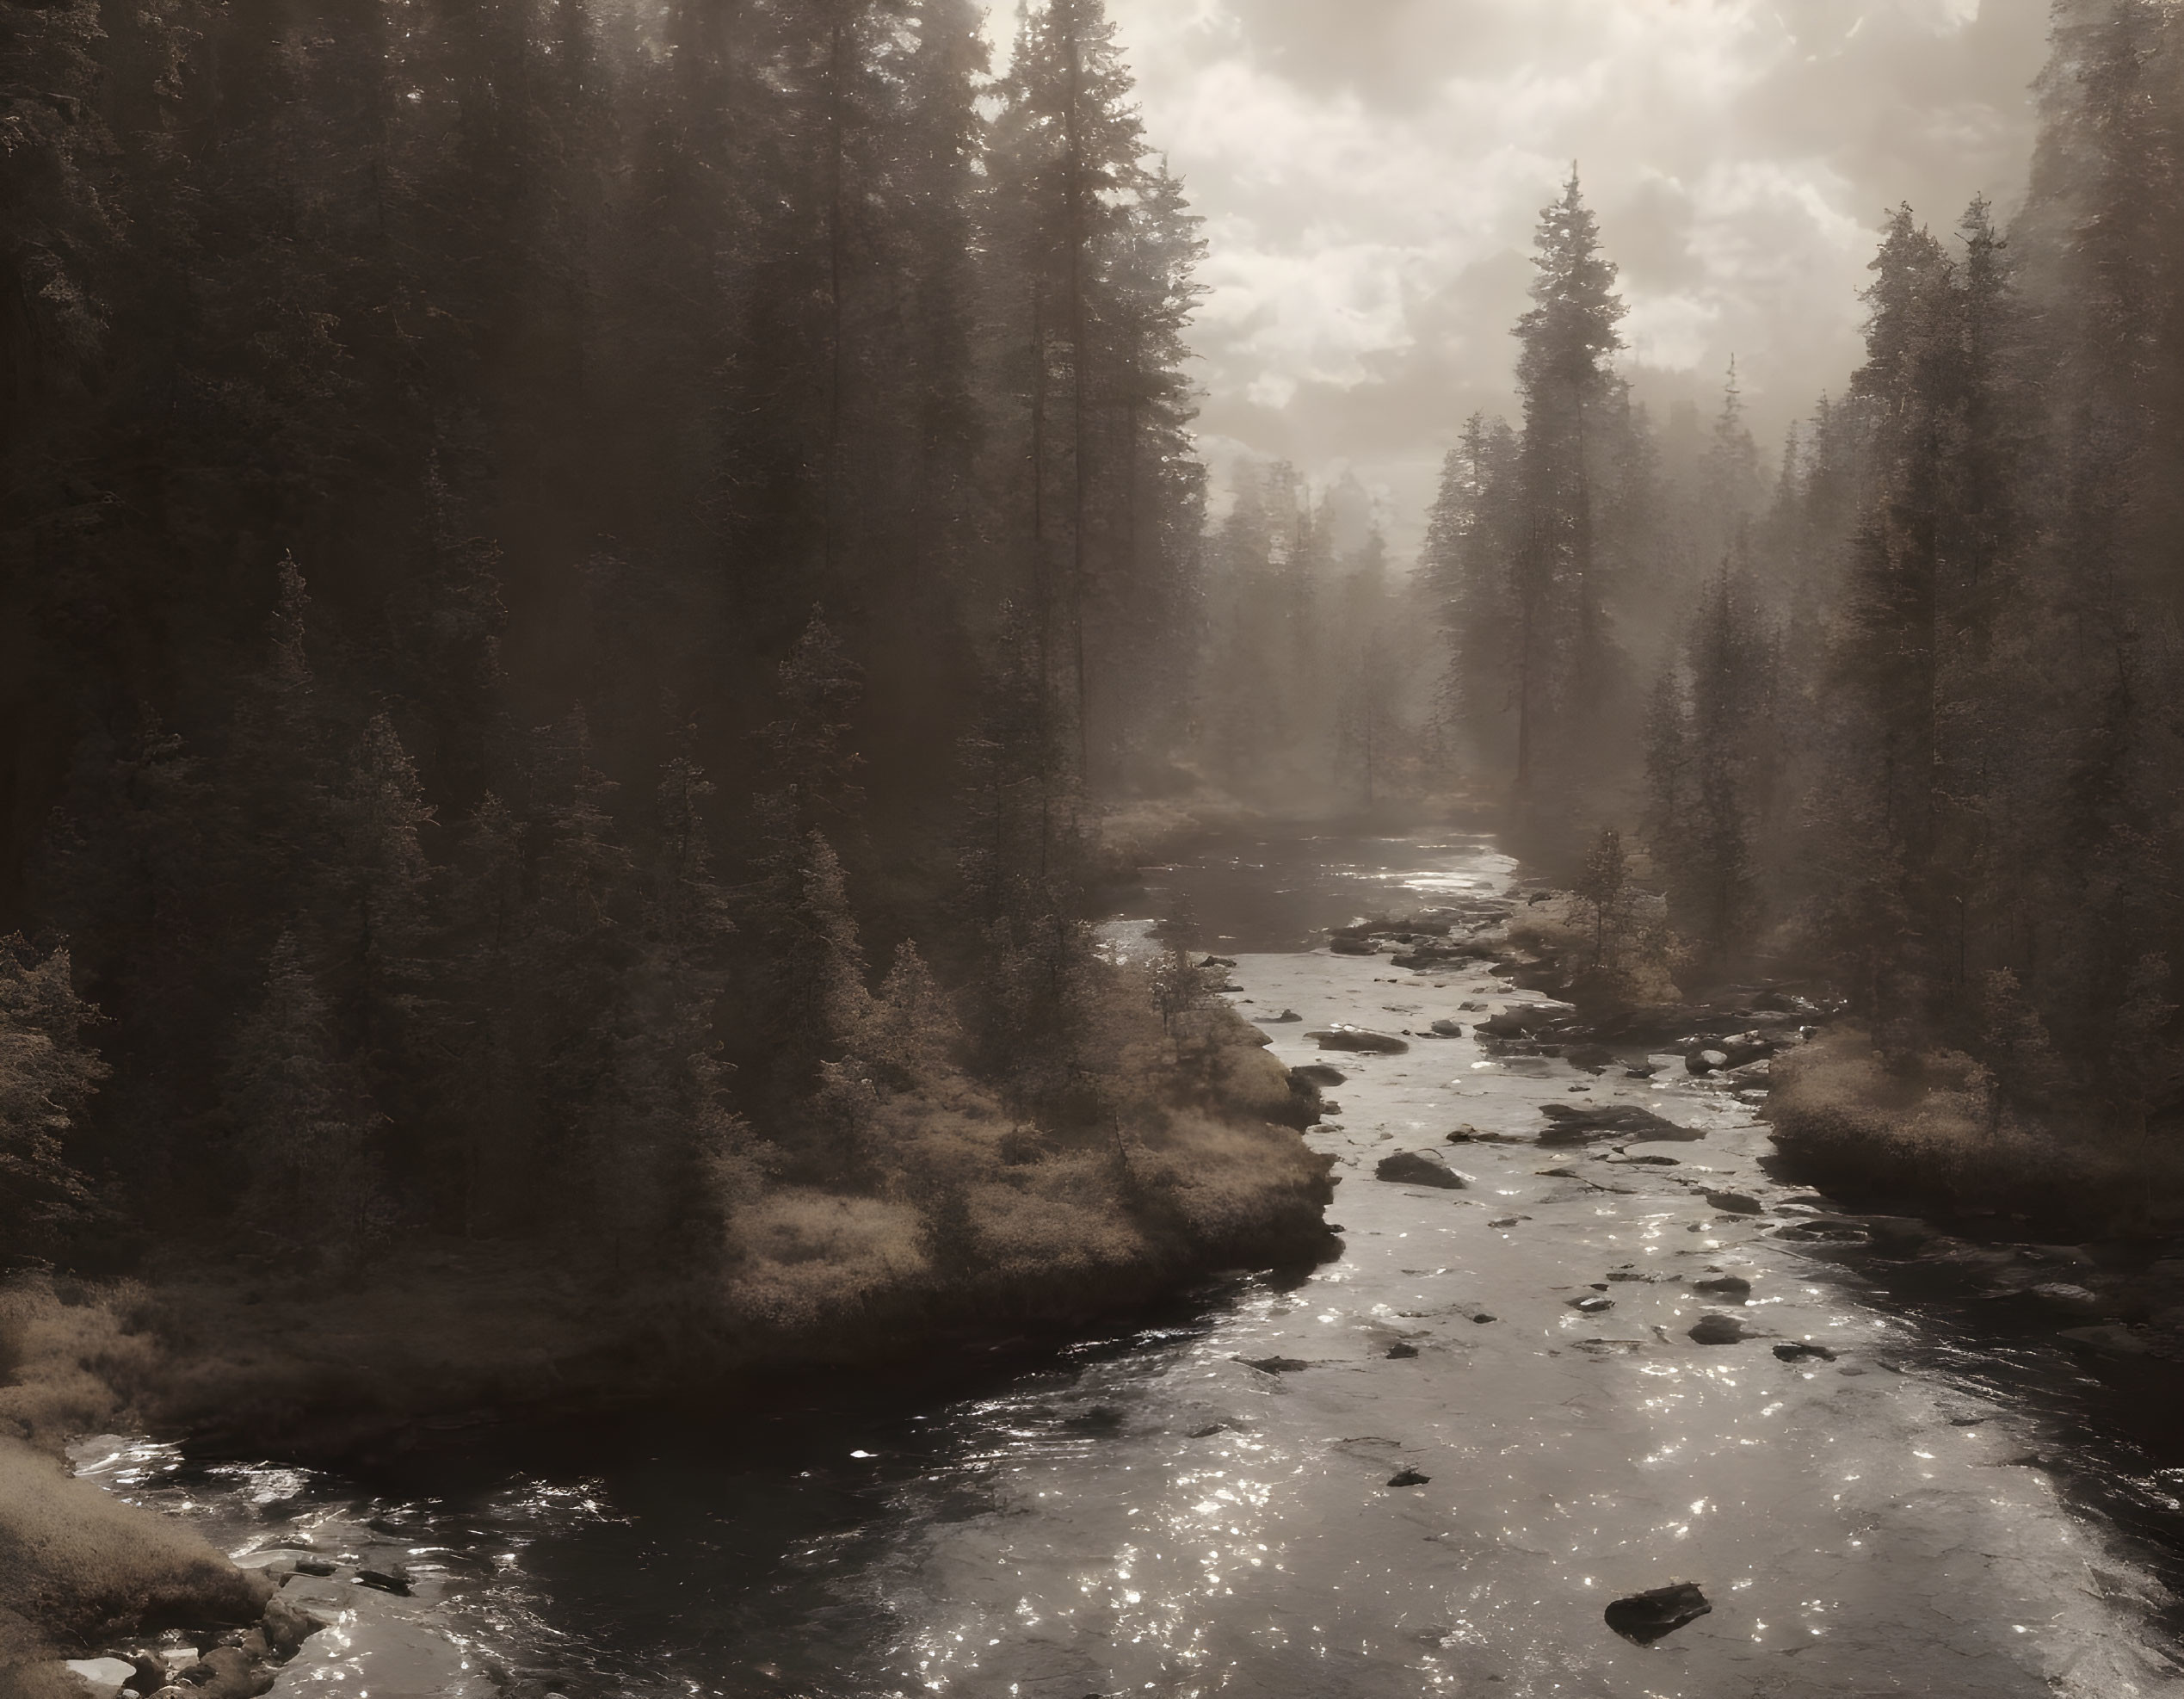 Tranquil river flowing through misty coniferous forest